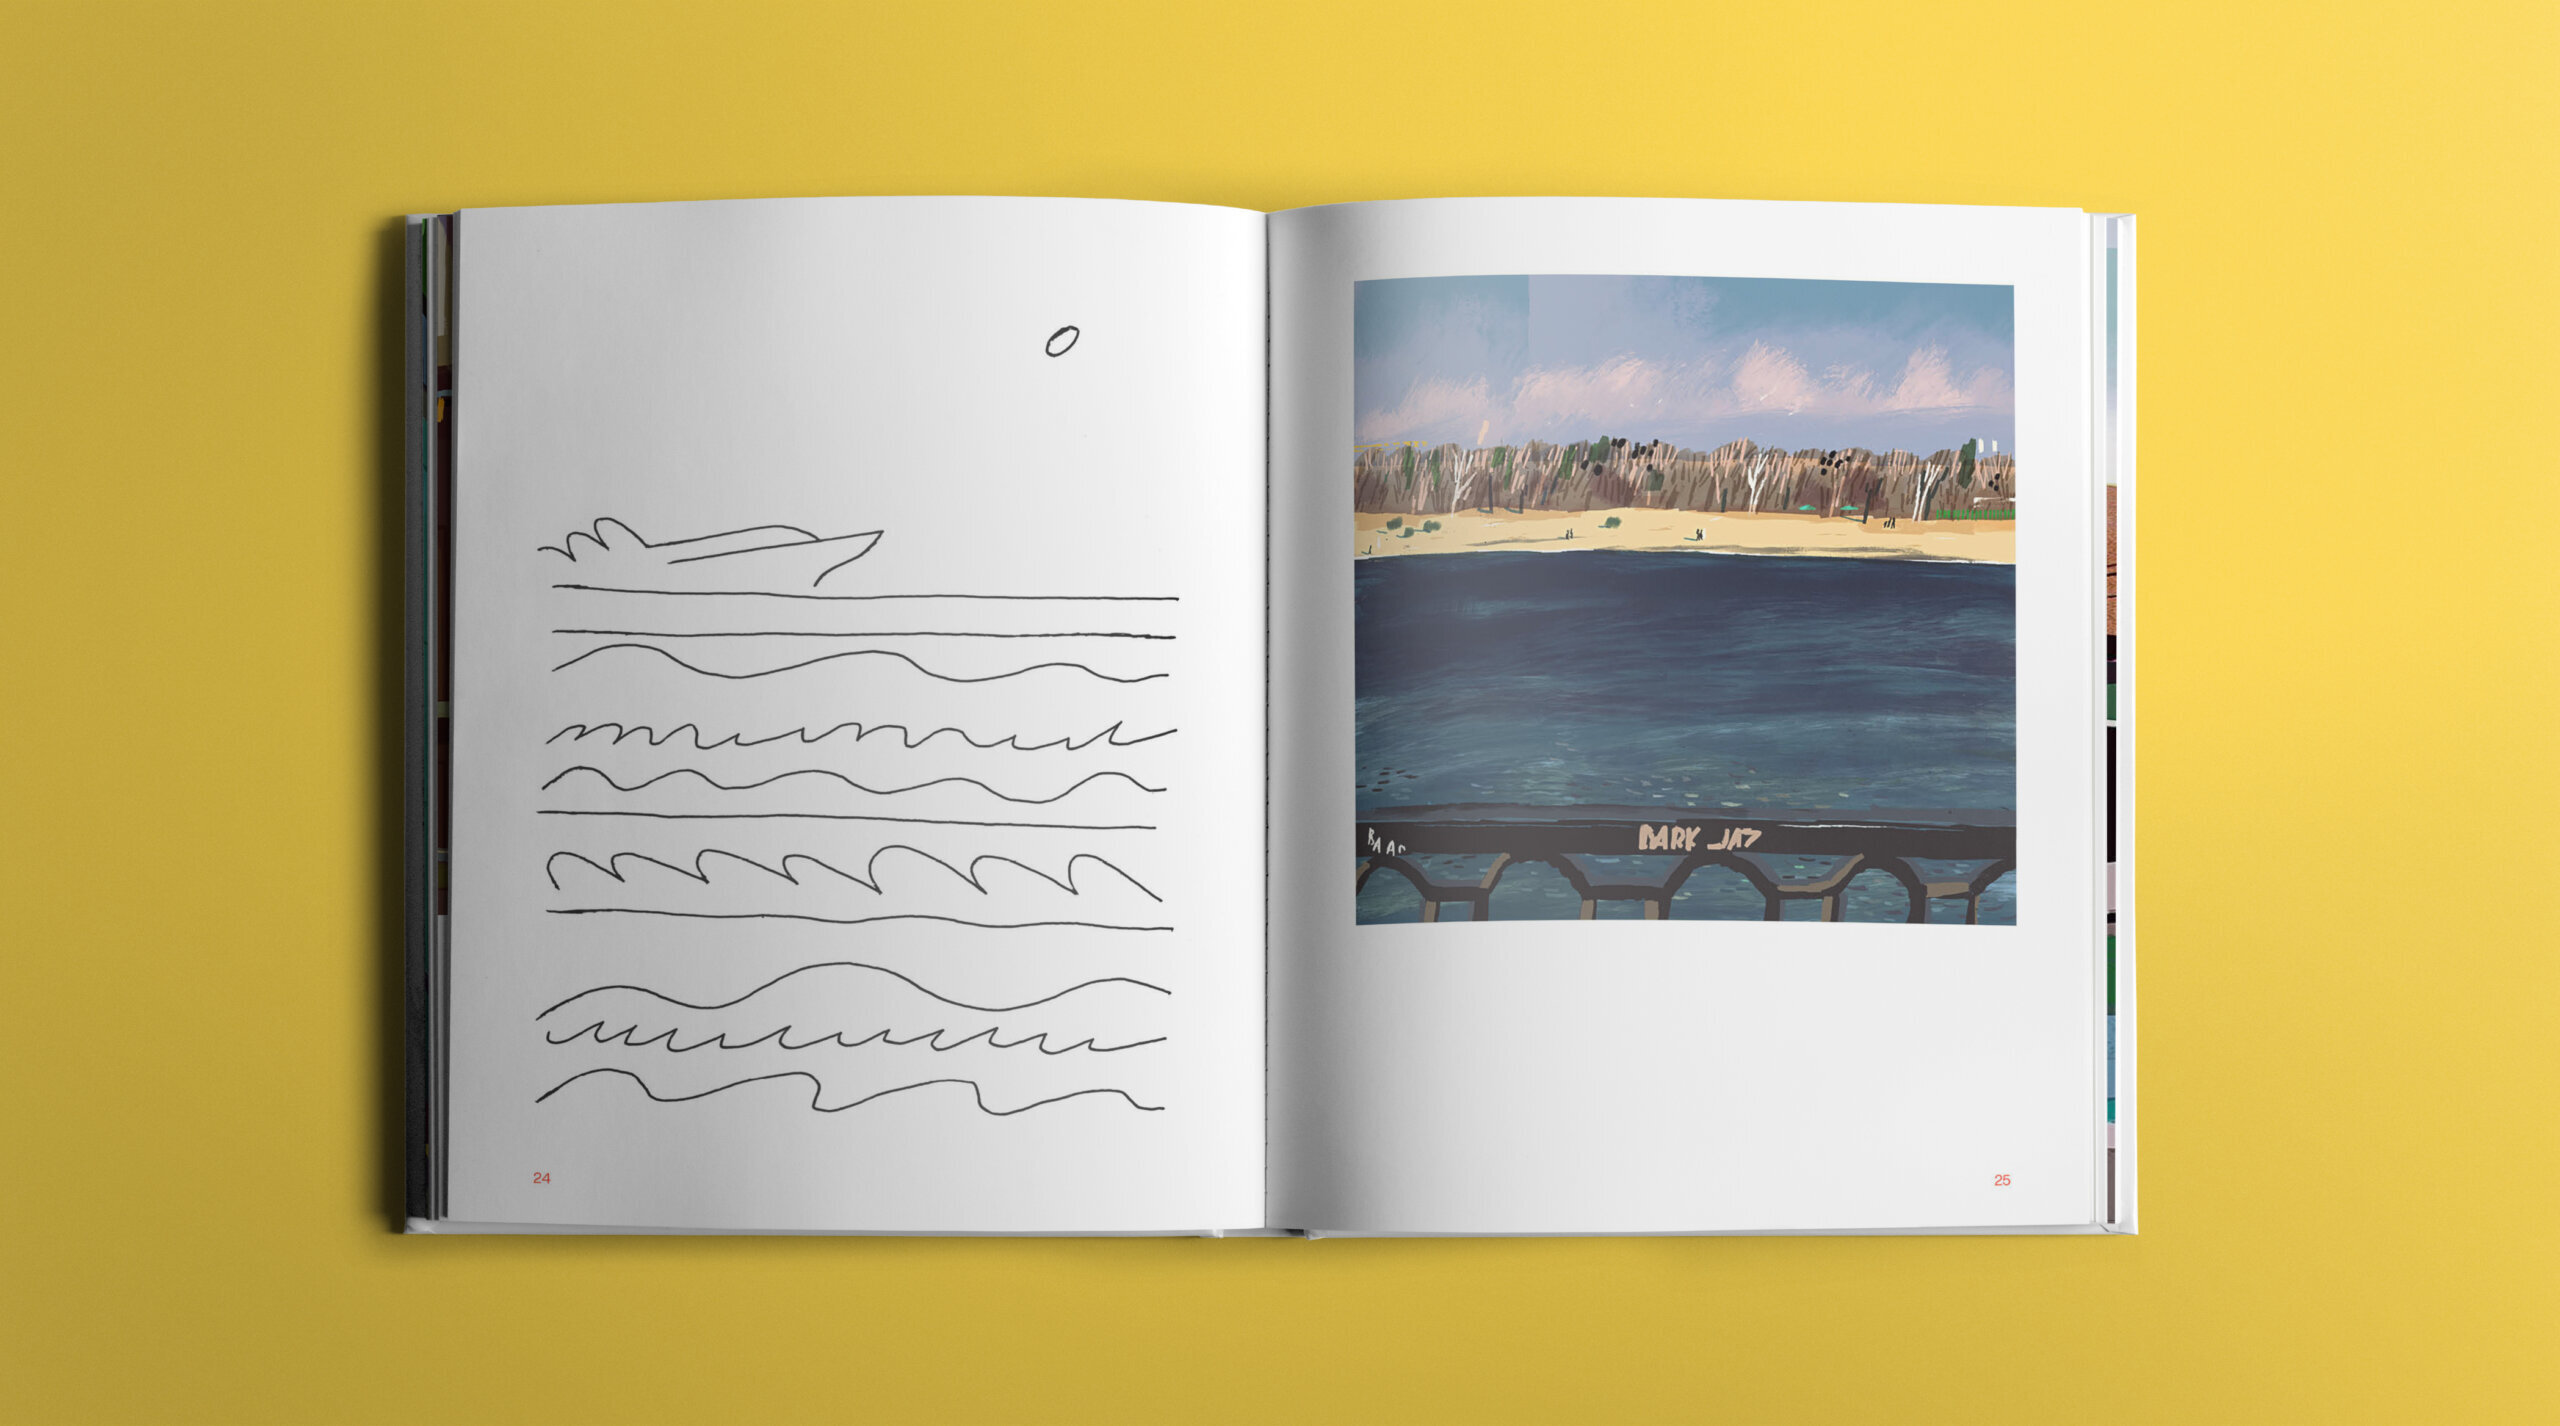 &#8220;Kyiv by Sergiy Maidukov&#8221; is a new art book released by IST Publishing that brings together a collection of sketches and illustrations of the Ukrainian capital&#8217;s life.